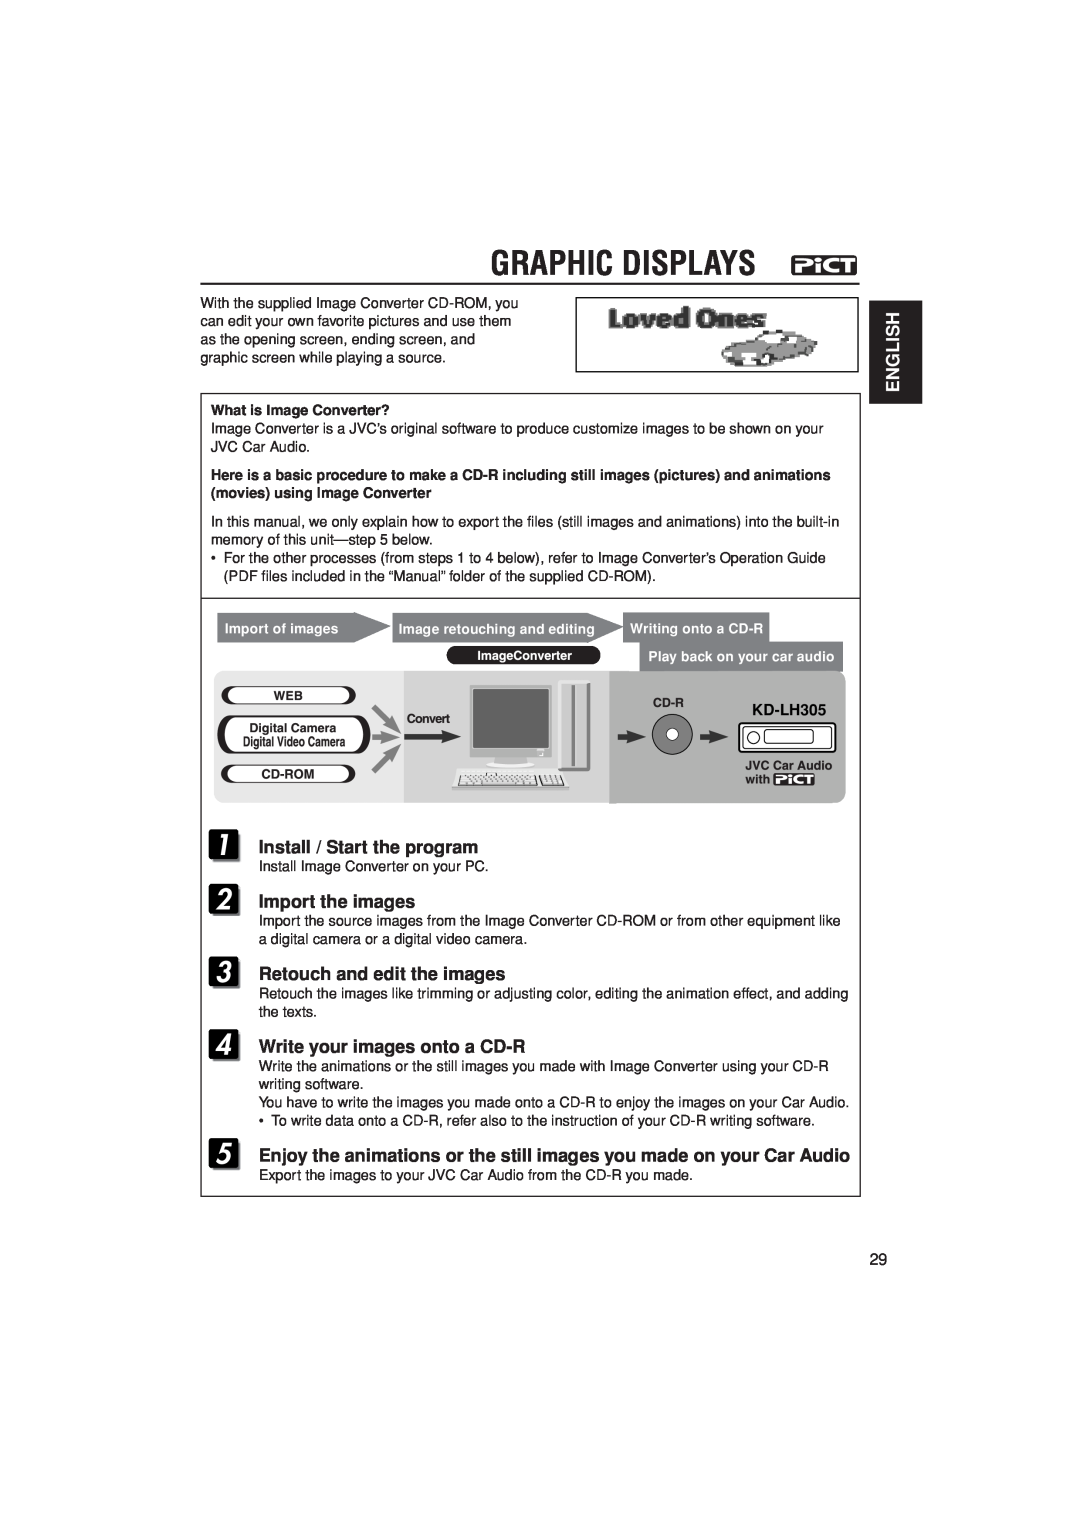 JVC KD-LH305 manual Graphic Displays, English, Install / Start the program, Import the images, Retouch and edit the images 